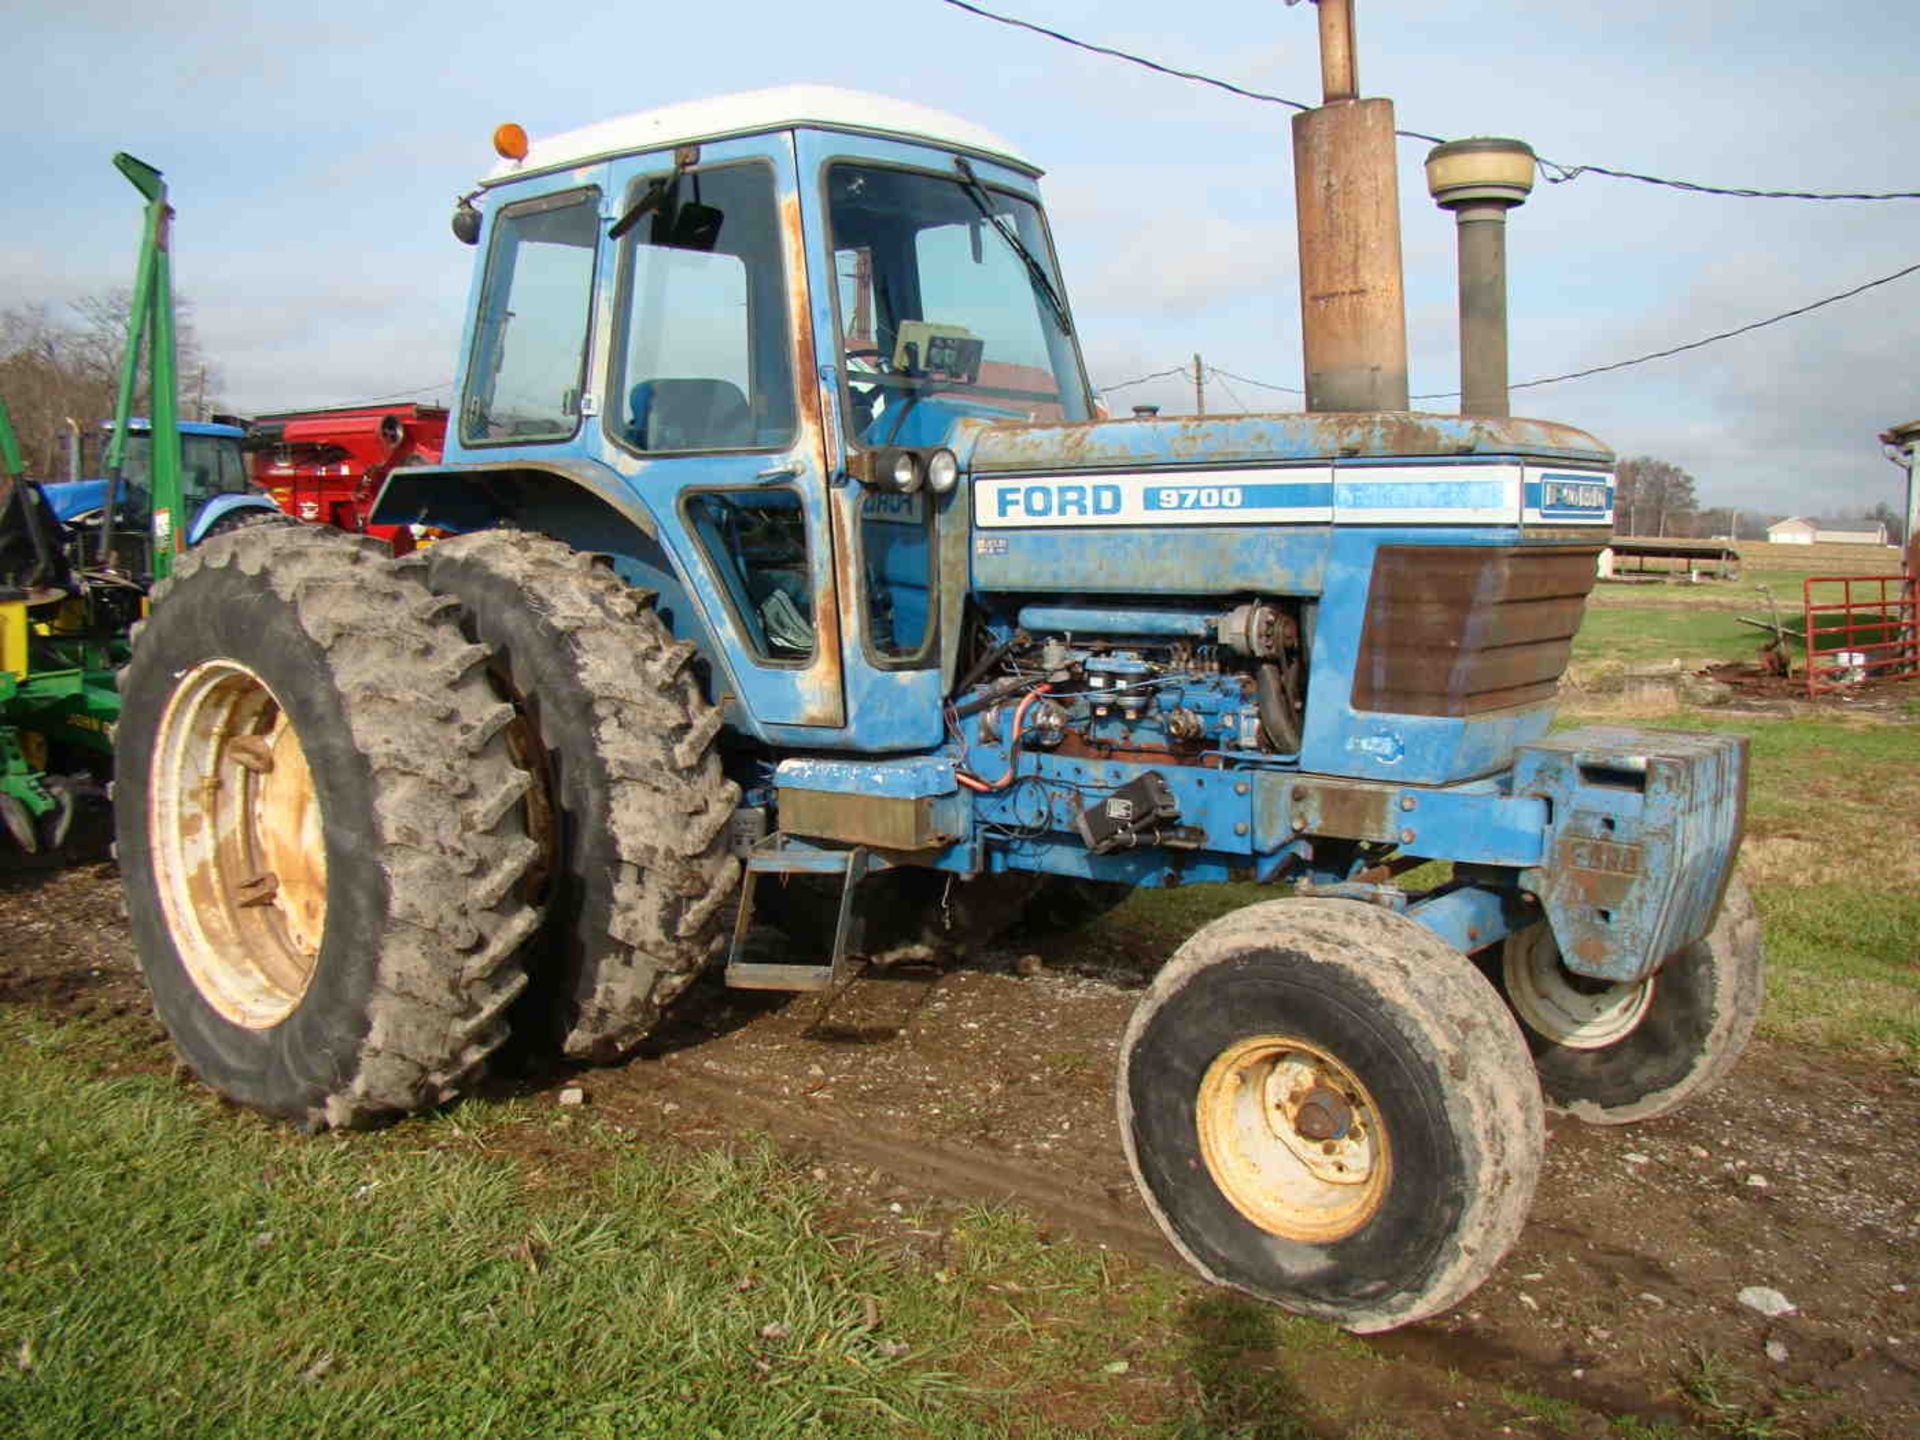 1978 Ford 9700 2wd tractor 8,272 hrs, w/duals Firestone 18.4-38, serial H2577B - Image 5 of 9